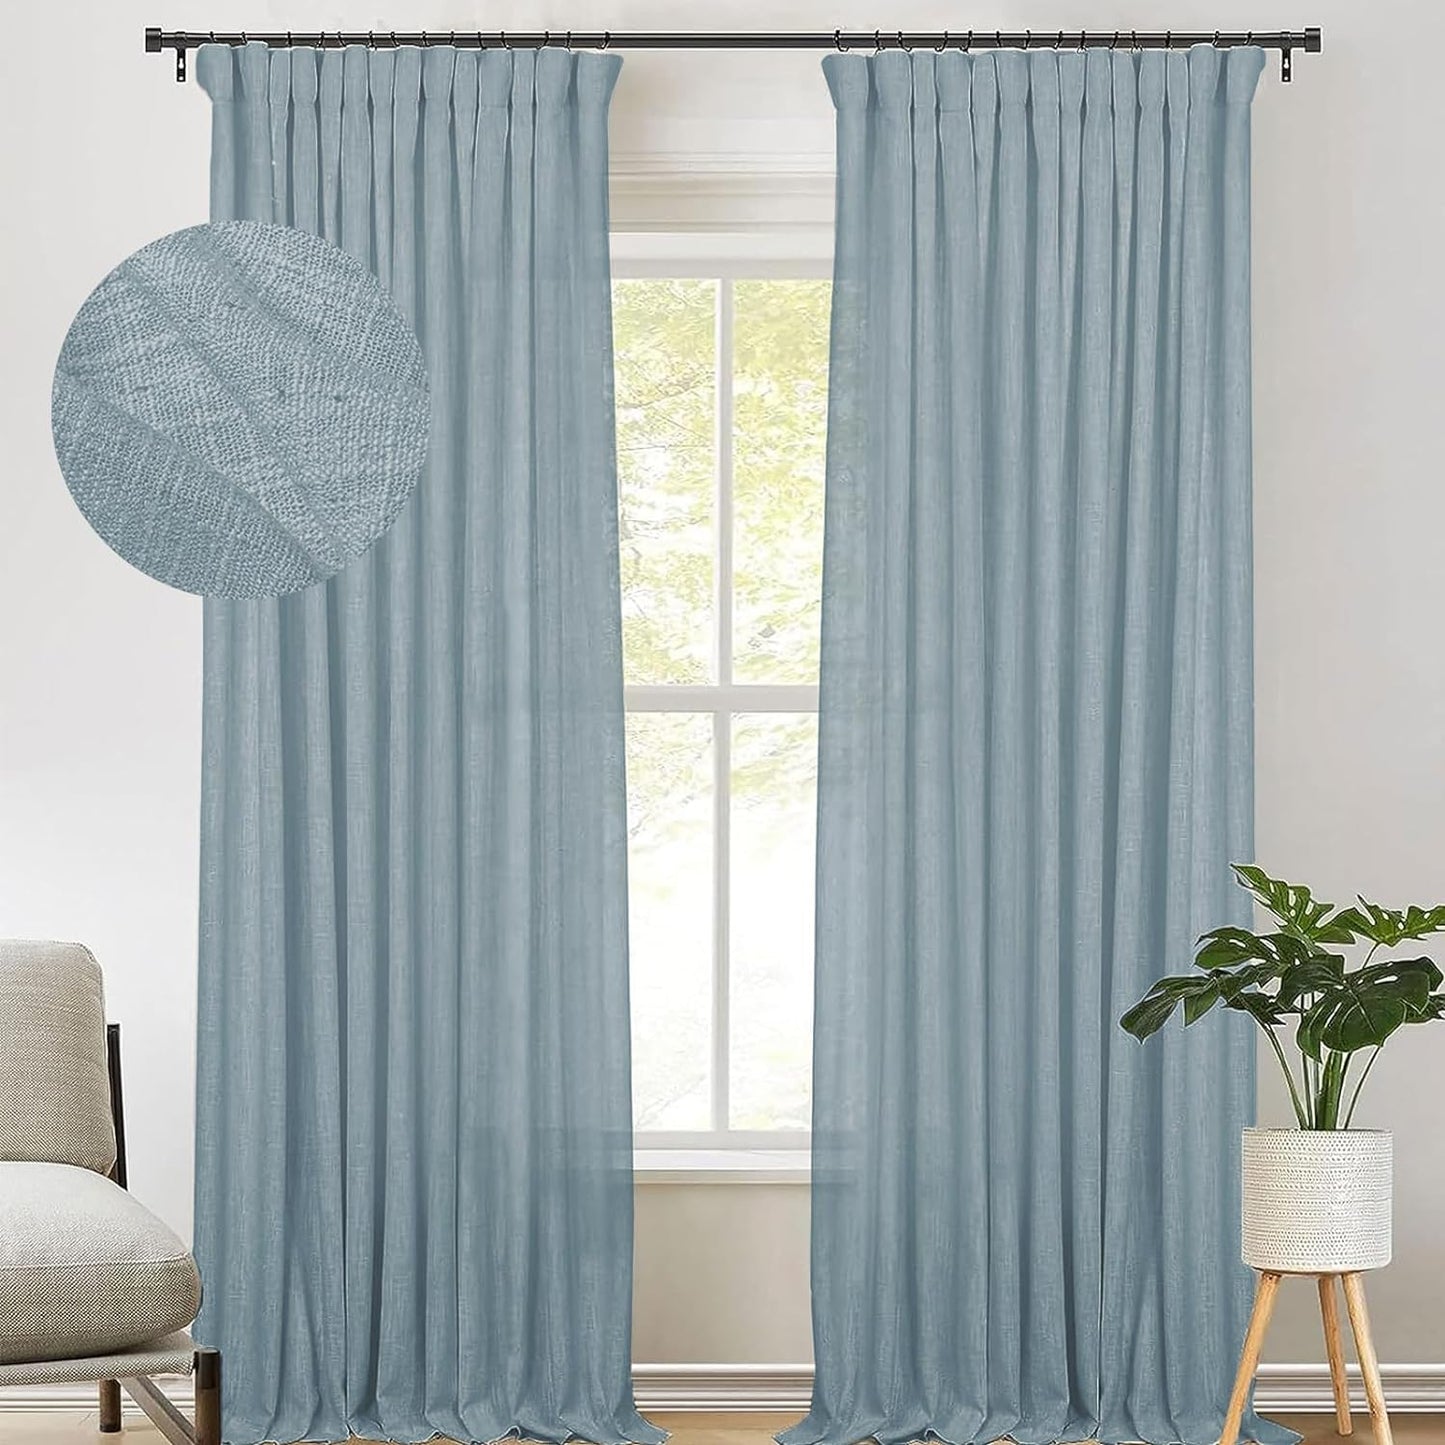 Zeerobee Beige White Linen Curtains for Living Room/Bedroom Linen Curtains 96 Inches Long 2 Panels Linen Drapes Farmhouse Pinch Pleated Curtains Light Filtering Privacy Curtains, W50 X L96  zeerobee 08 Sea Green 50"W X 90"L 